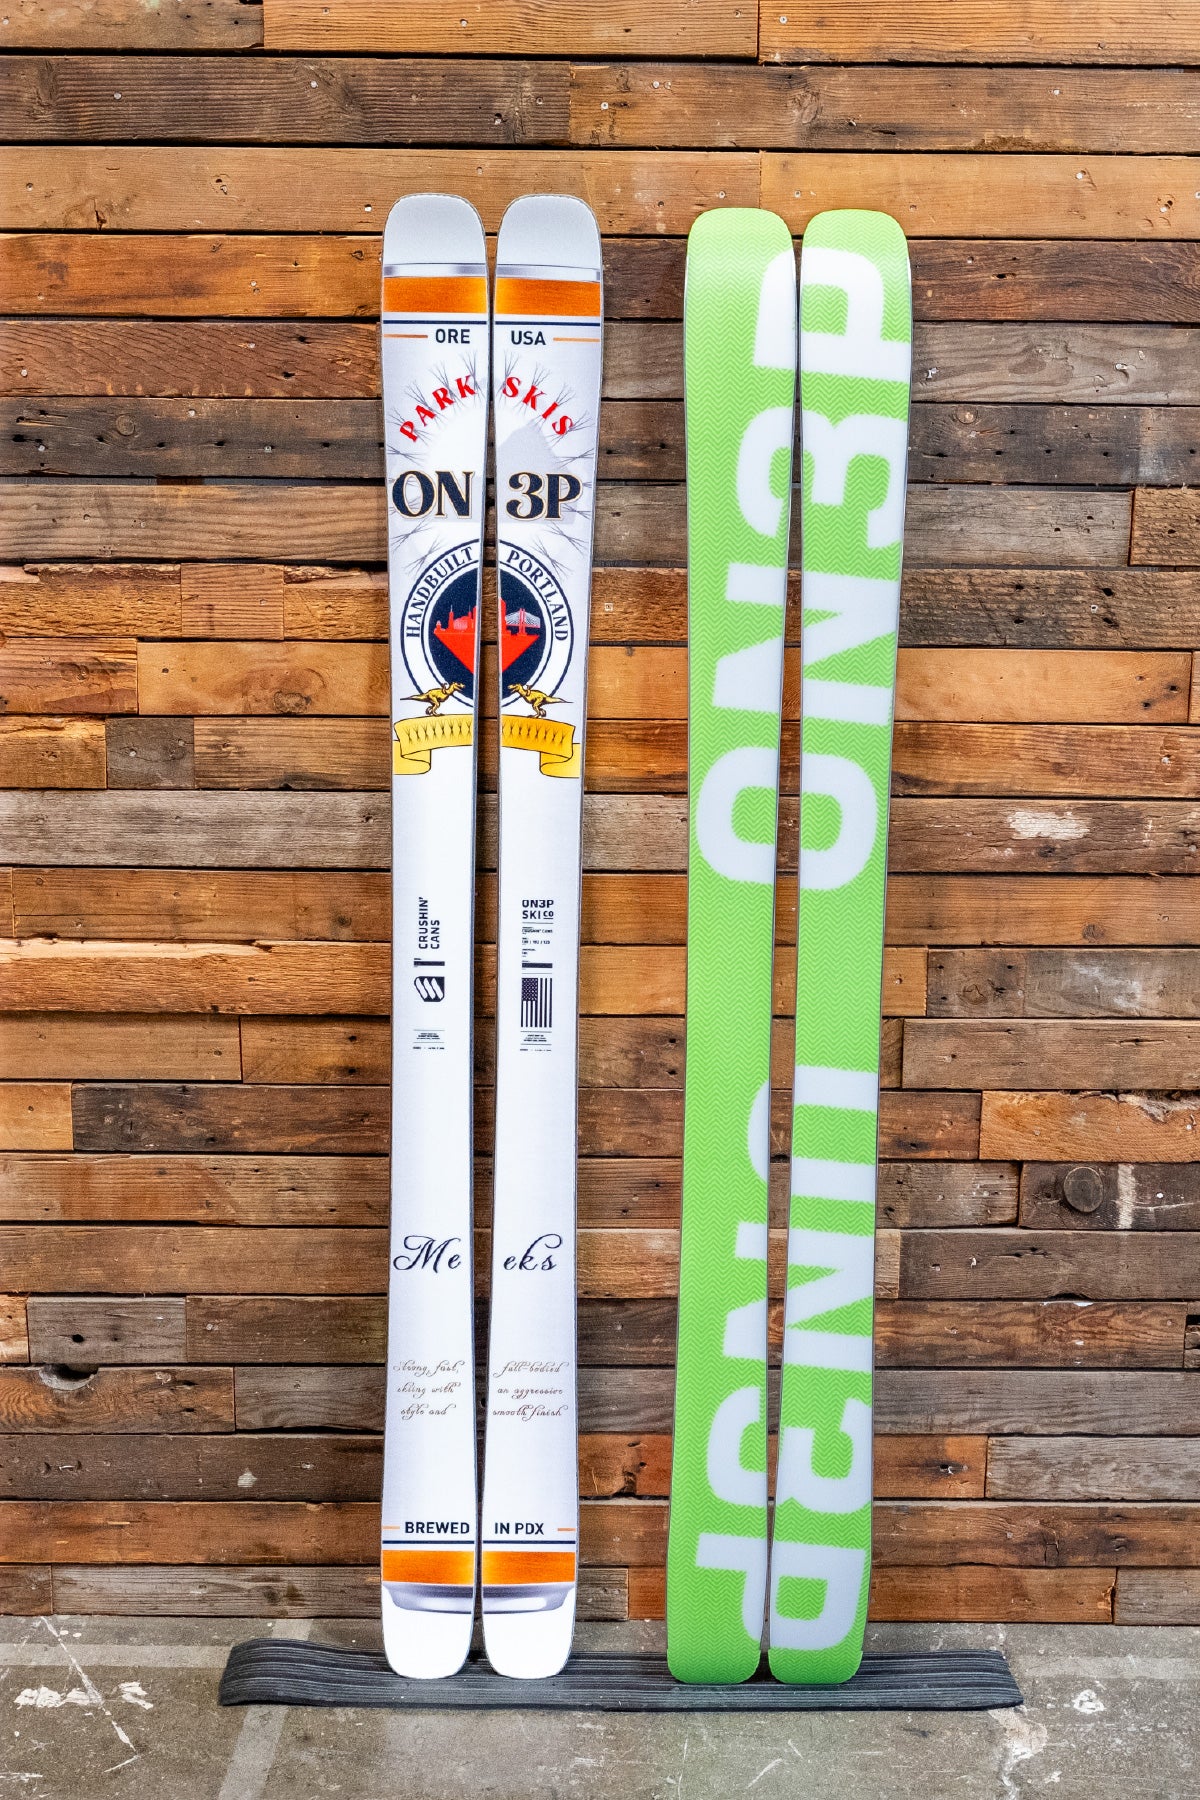 FACTORY FINDS – ON3P Skis